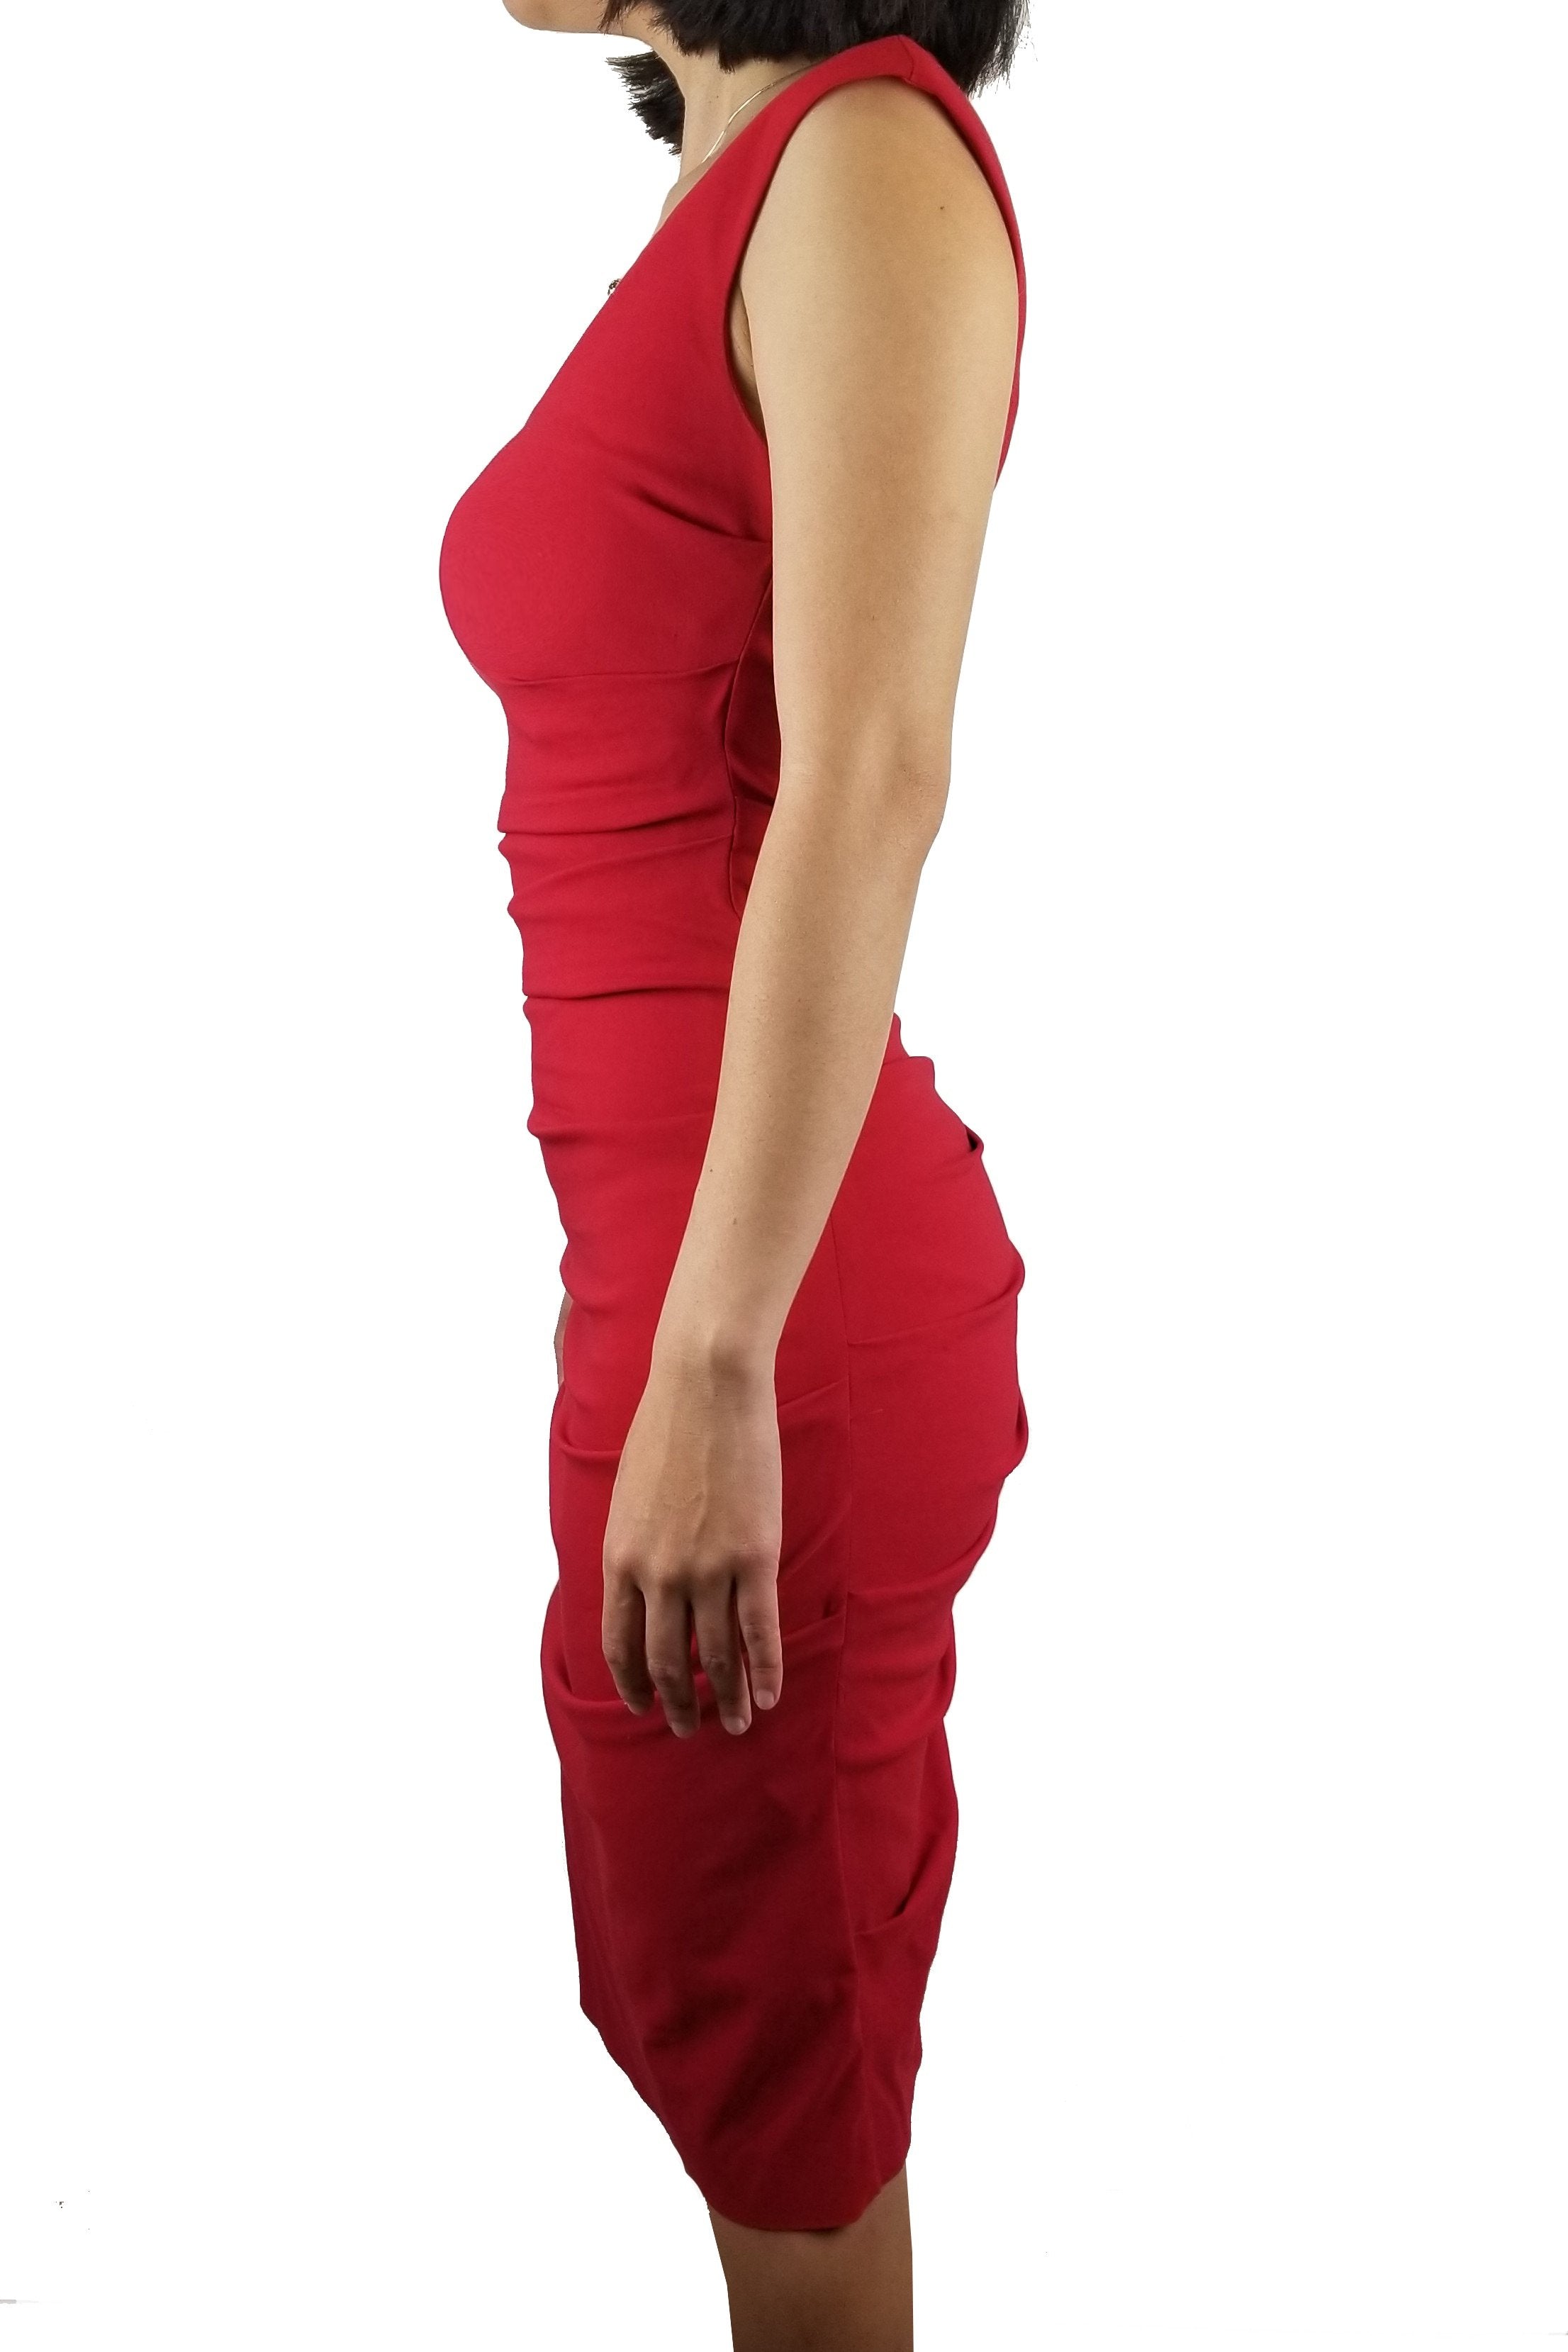 Le Chateau Red Bodycon Dress, Stand out in the crowd with this super flattering red dress!, Red, Shell: 70% Rayon, 26% Nylon, 4% Spandex. Lining: 100% Polyester, Red dress, bodycon dress, flattering dress, party dress, event dress, women's event dress